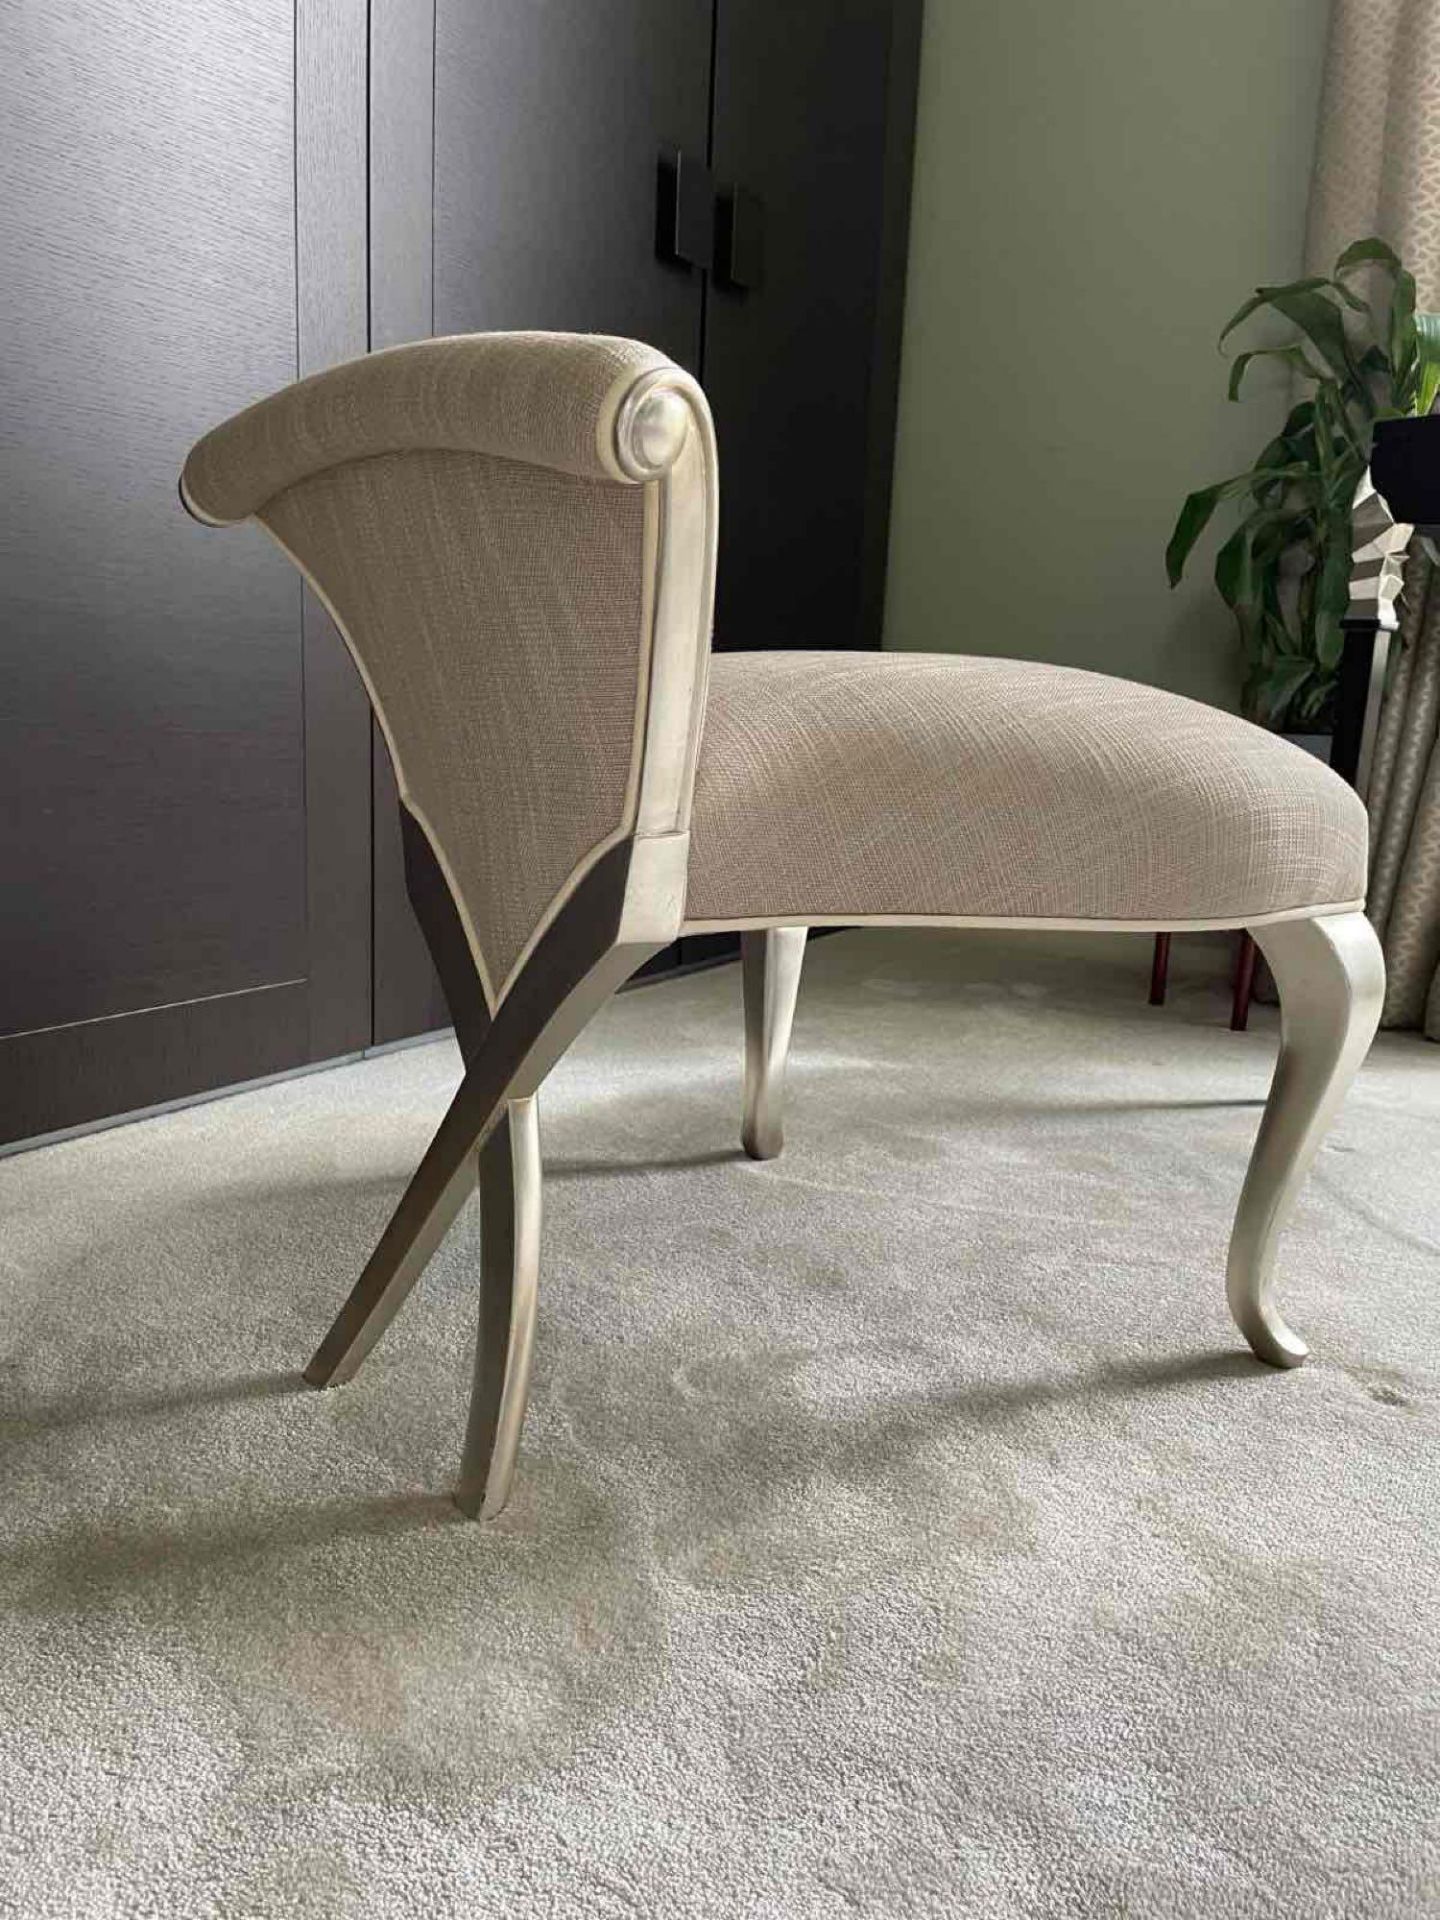 Christopher Guy Givenchy boudoir chair upholstered in Ascari Pearl Elegance is exemplified in this - Image 6 of 8